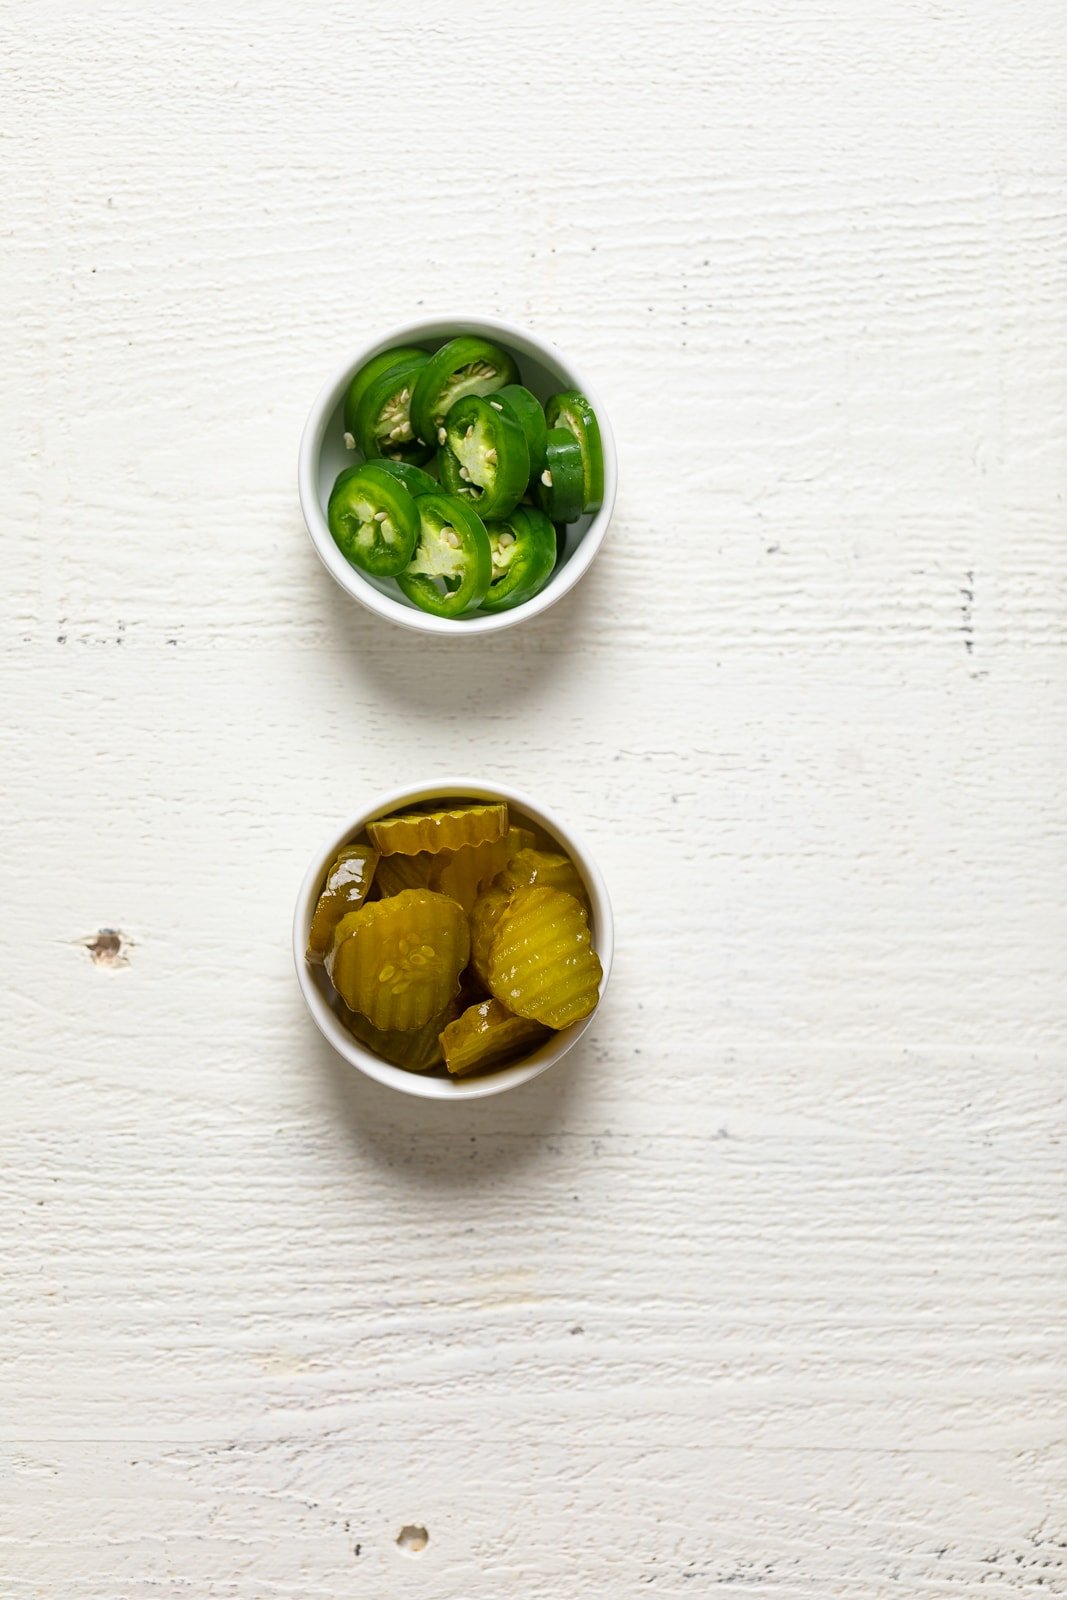 Small bowls of pickle slices and hot pepper slices